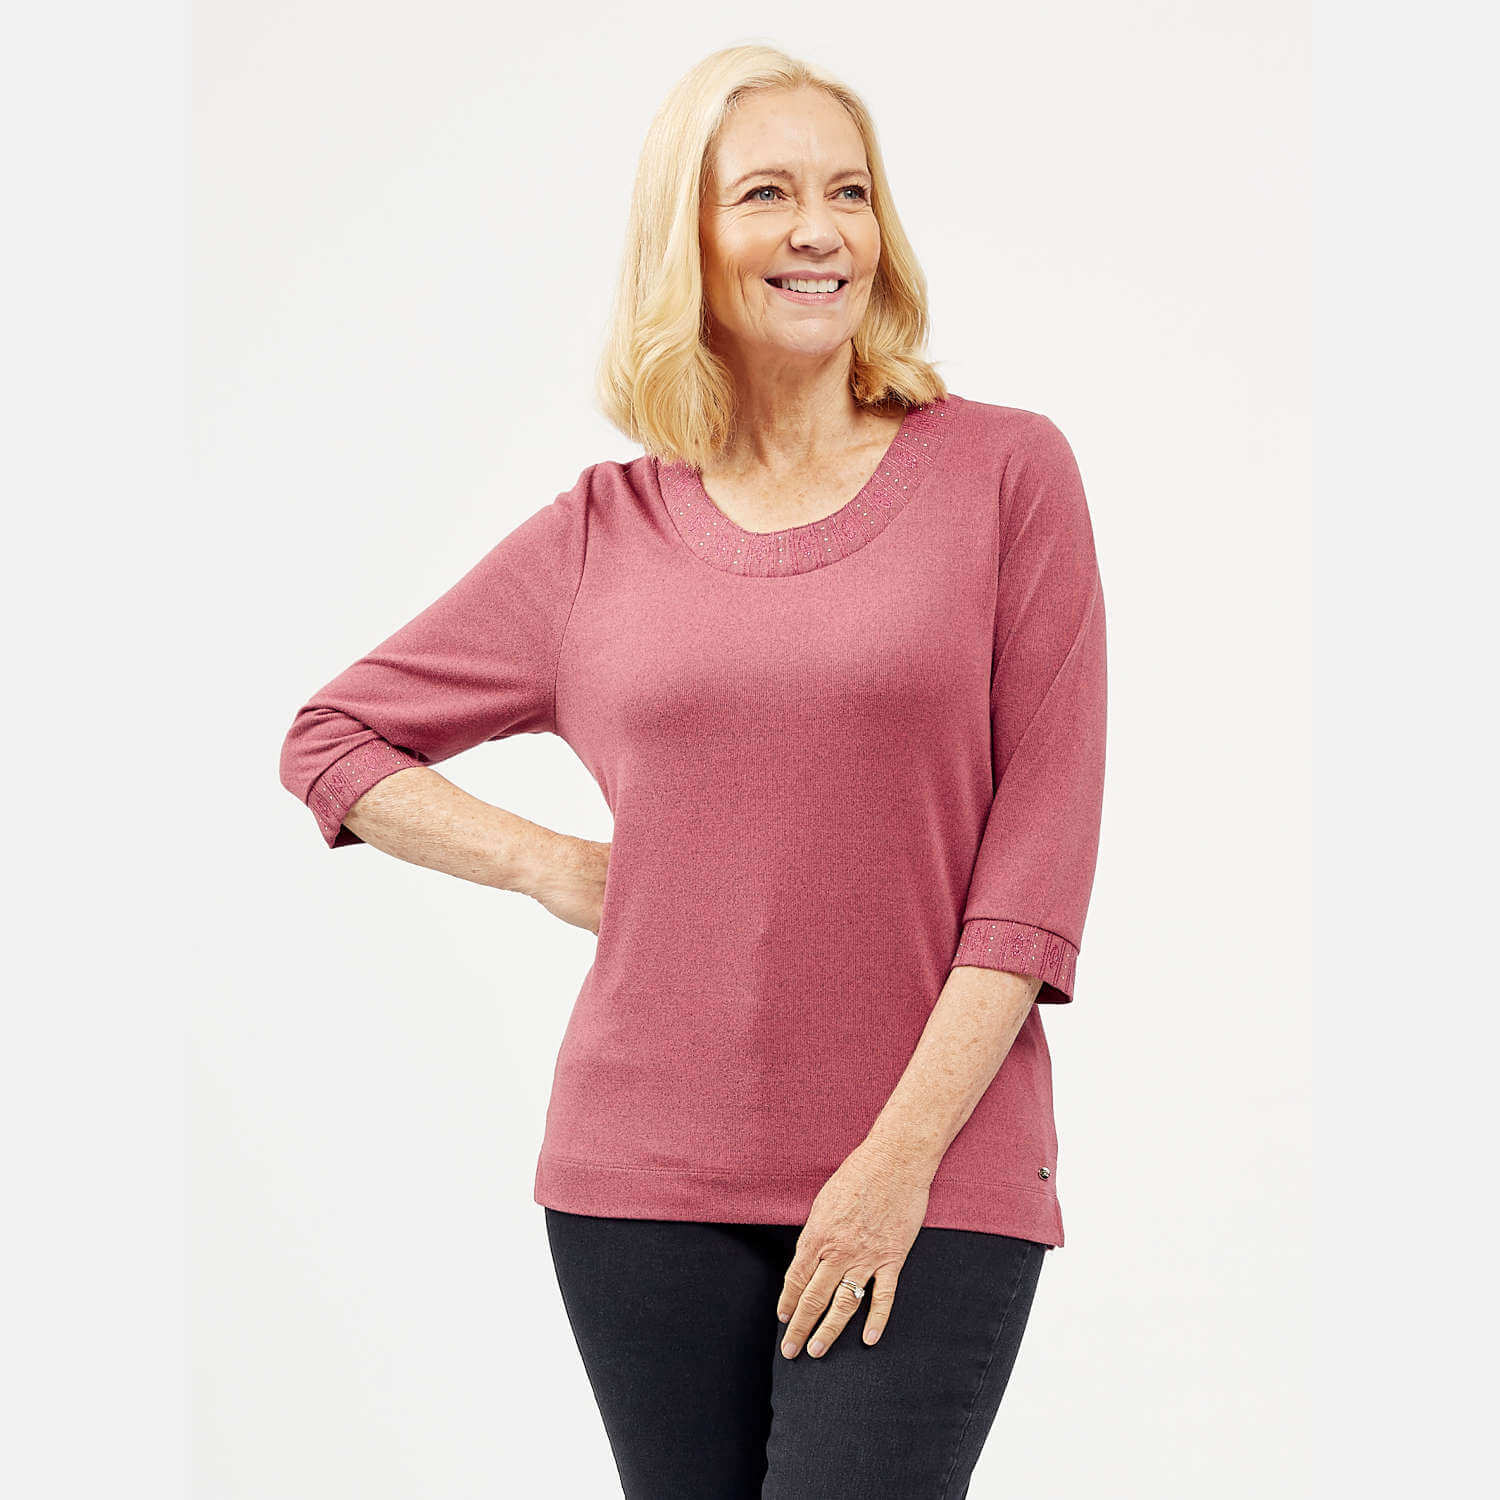 Tigiwear Embellished Neck Top - Peony 1 Shaws Department Stores